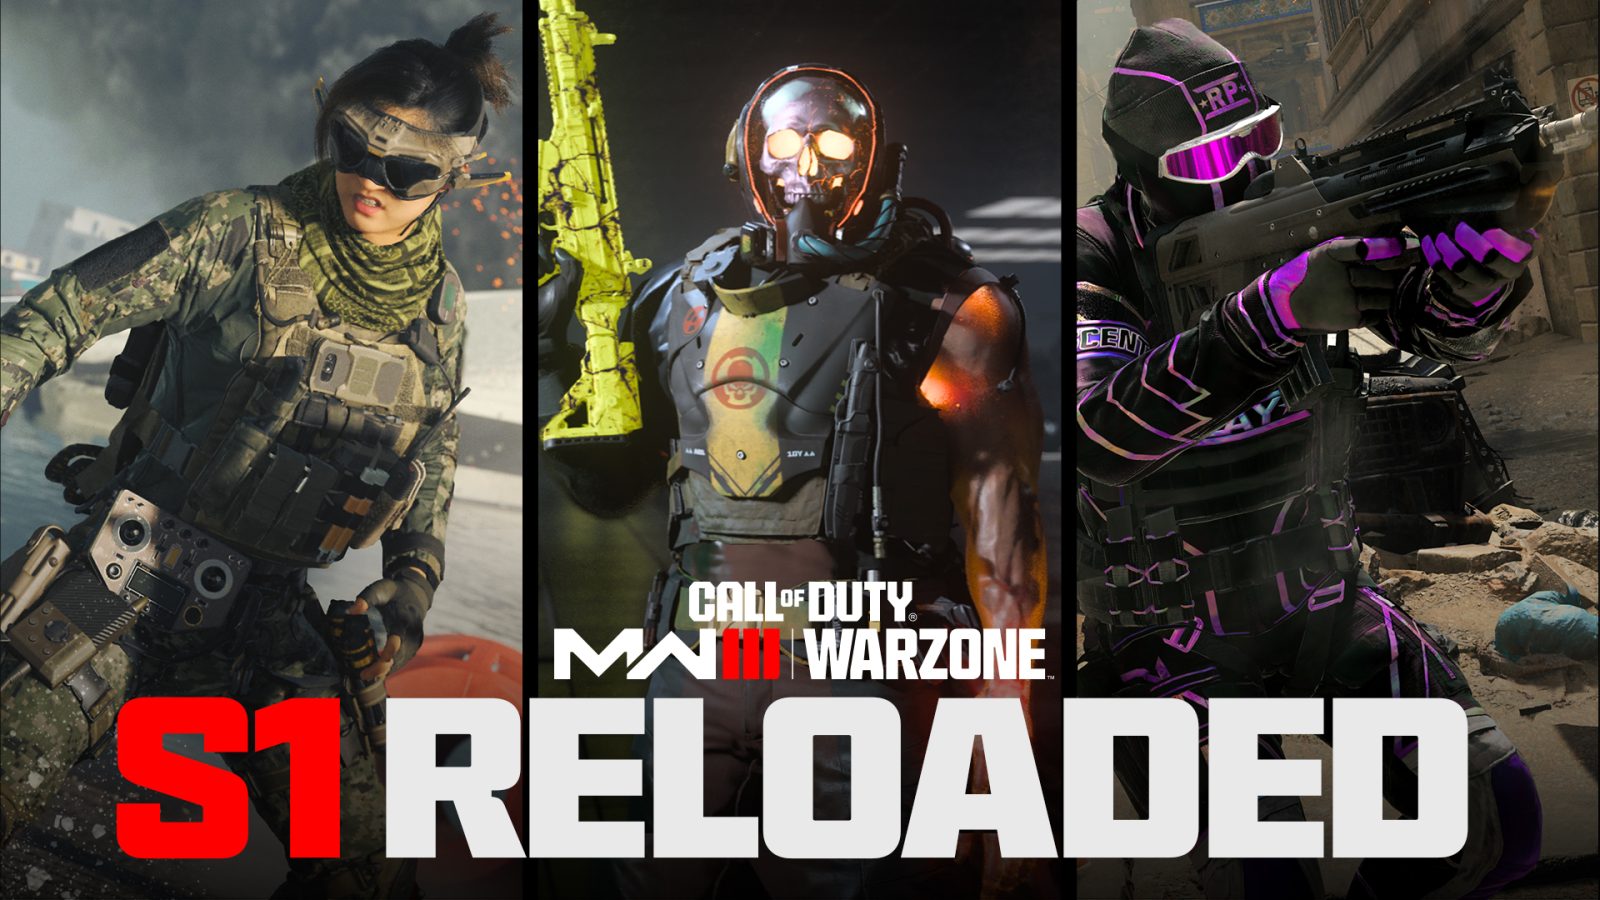 10 Ways To Use The Riot Shield In Call Of Duty: Warzone